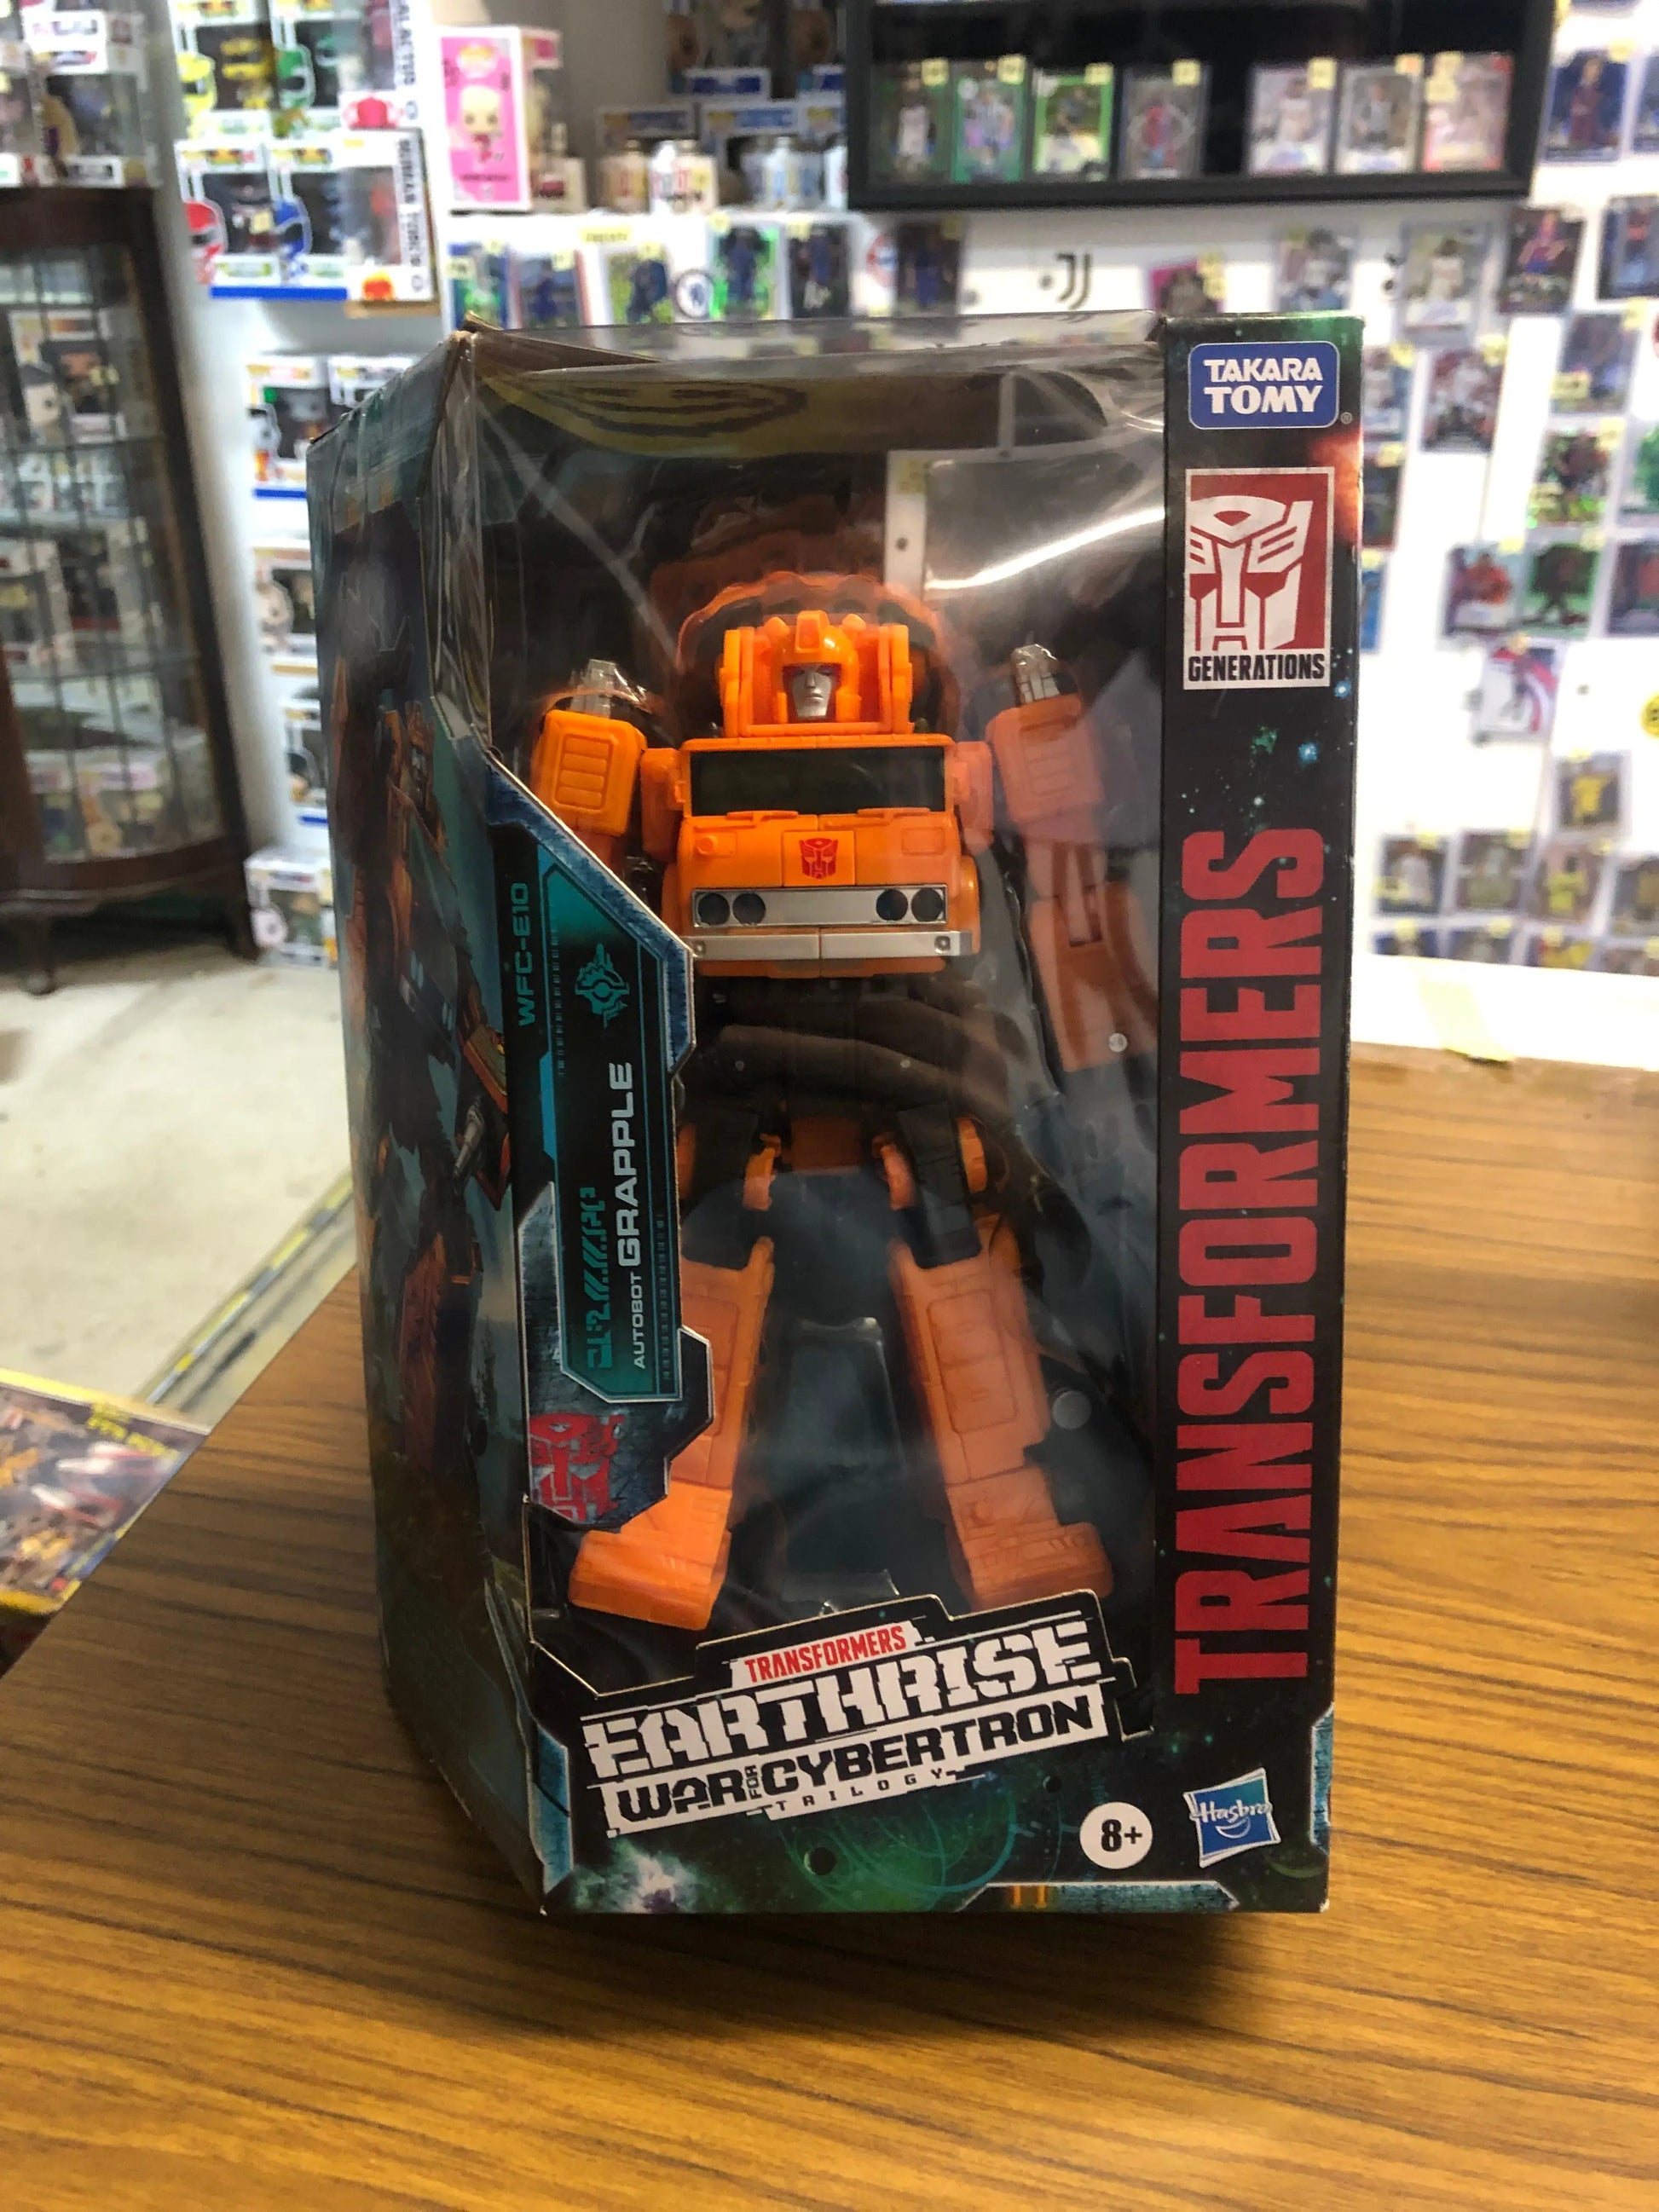 Transformers Earthrise GRAPPLE War for Cybertron Voyager Class WFC-E10 Figure FRENLY BRICKS - Open 7 Days